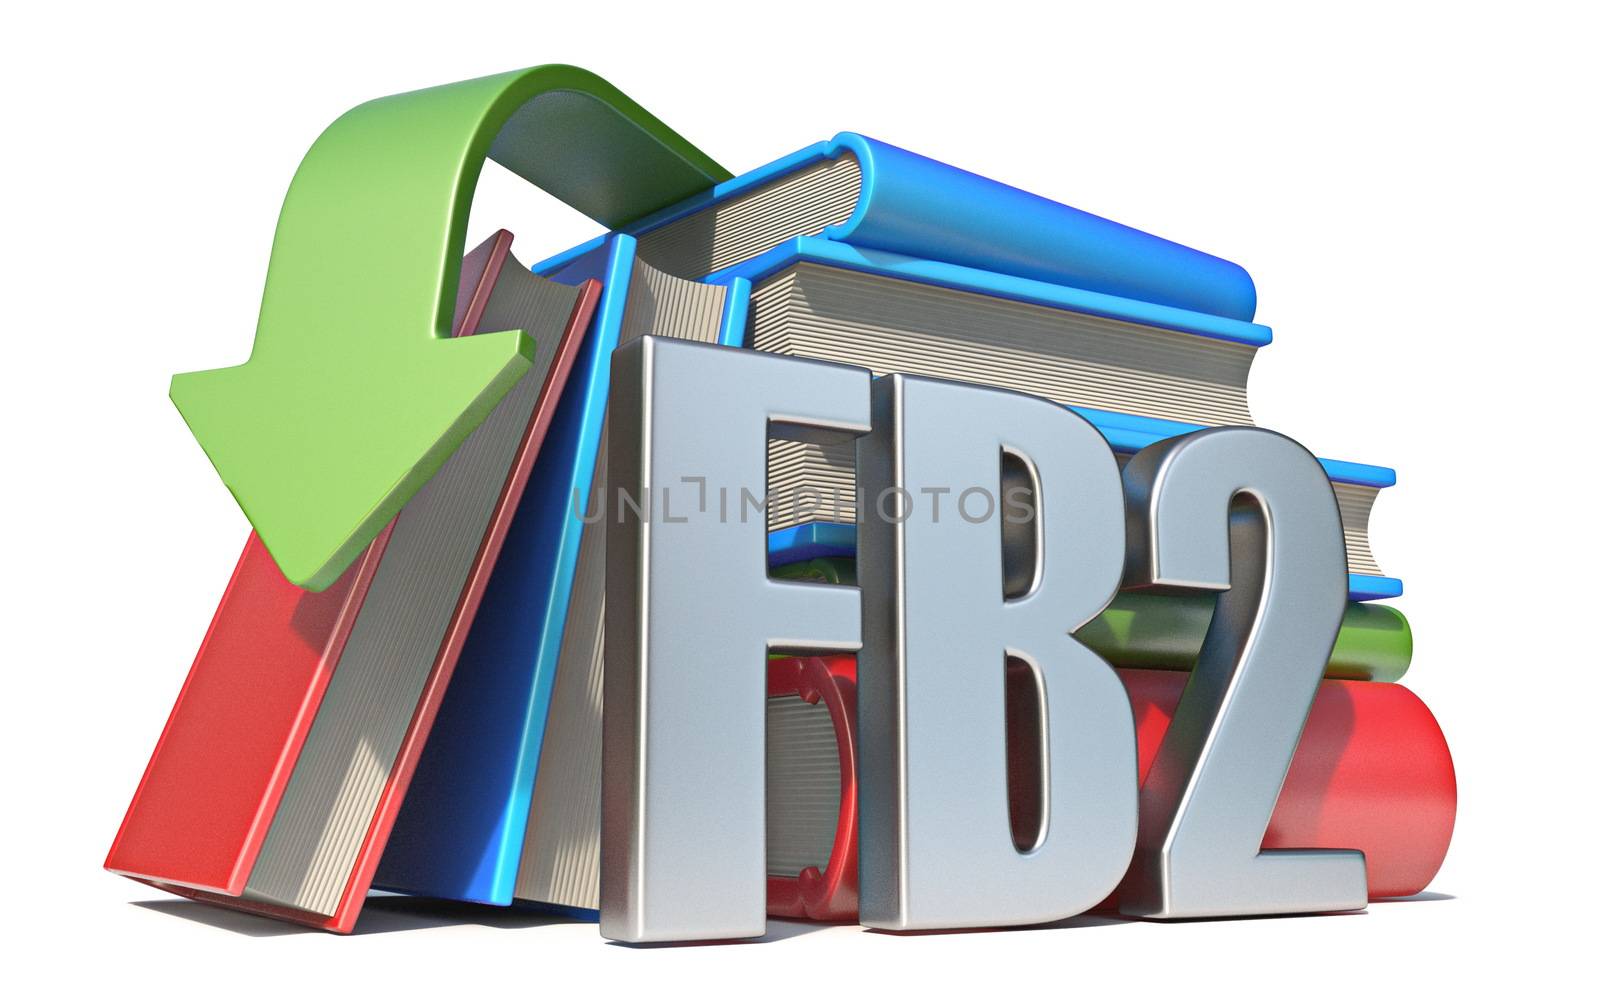 eBook FB2 download concept 3D render illustration isolated on white background